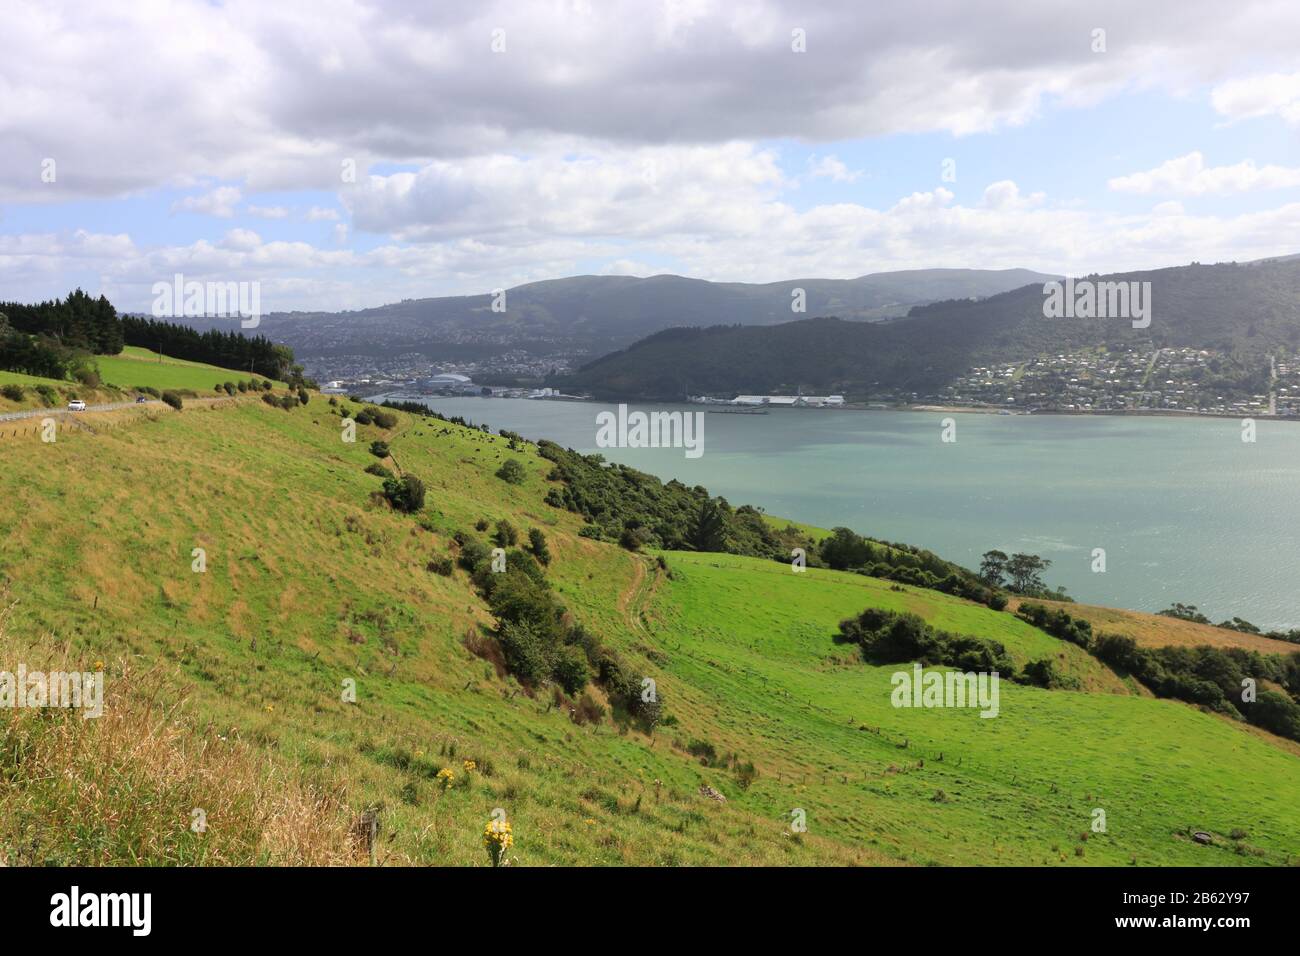 Akaroa Harbour, is part of Banks Peninsula in the Canterbury region of New Zealand. Stock Photo